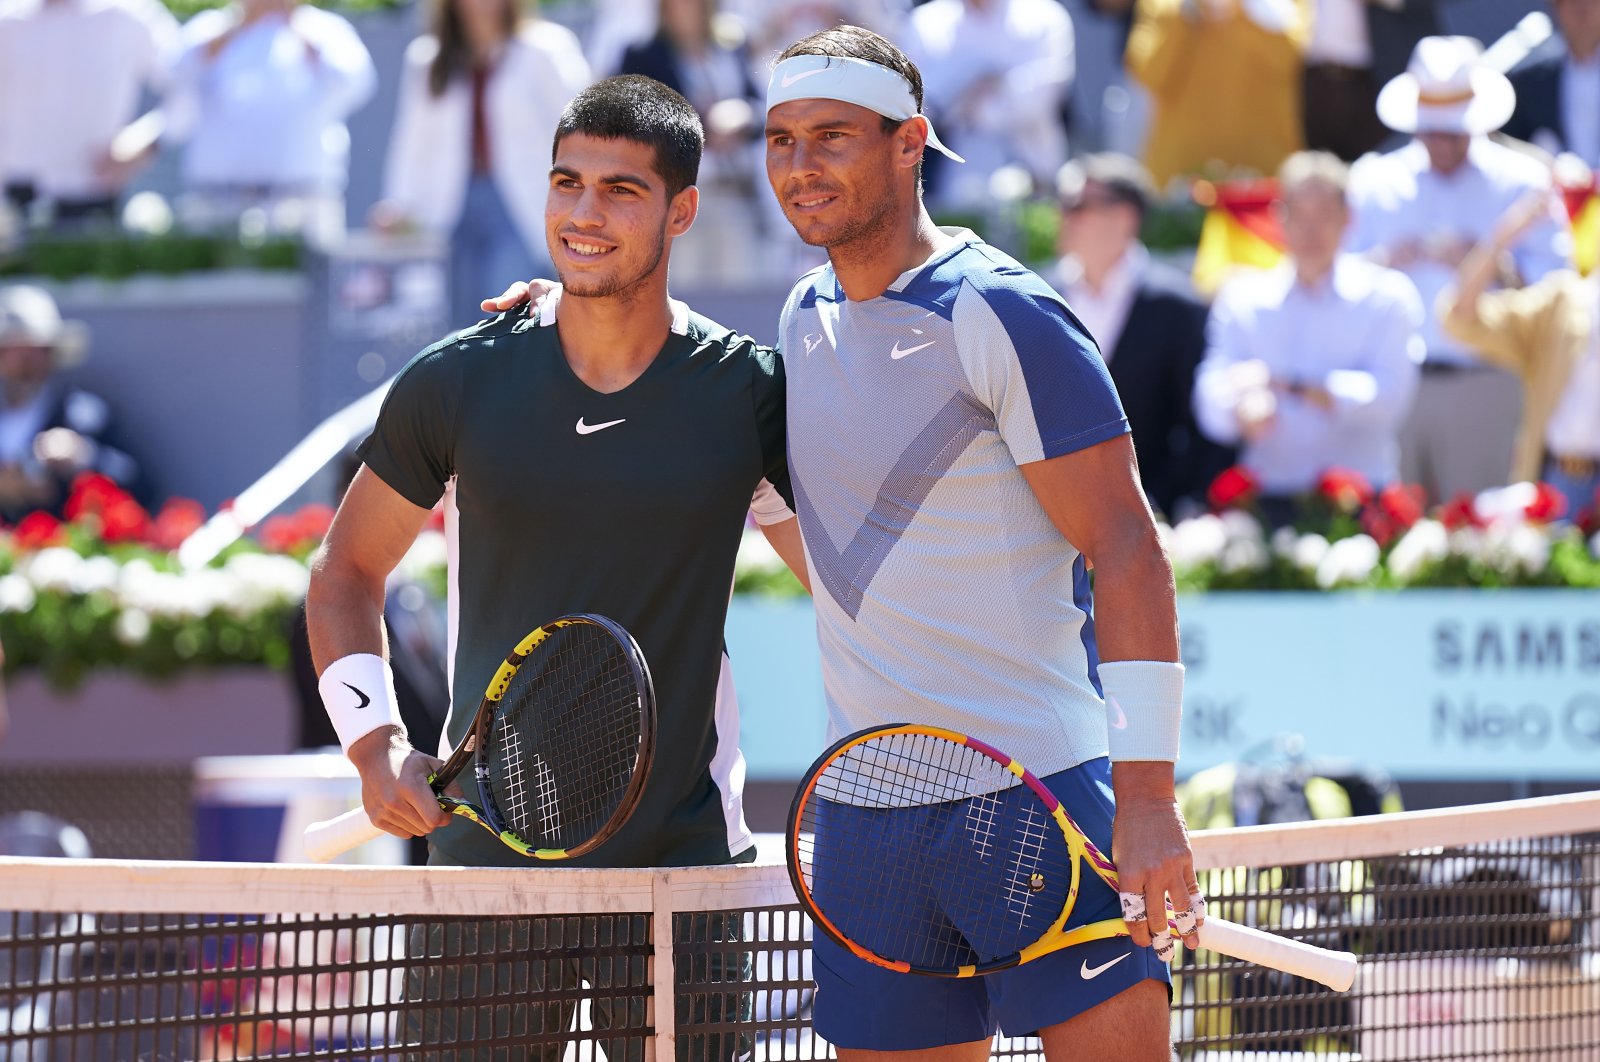 Spaniards Rafael Nadal (R) and Carlos Alcaraz (R) pose for a photograph on day 9 of Mutua Madrid Open at La Caja Magica, Madrid, Spain, May 06, 2022. (Getty Images Photo)